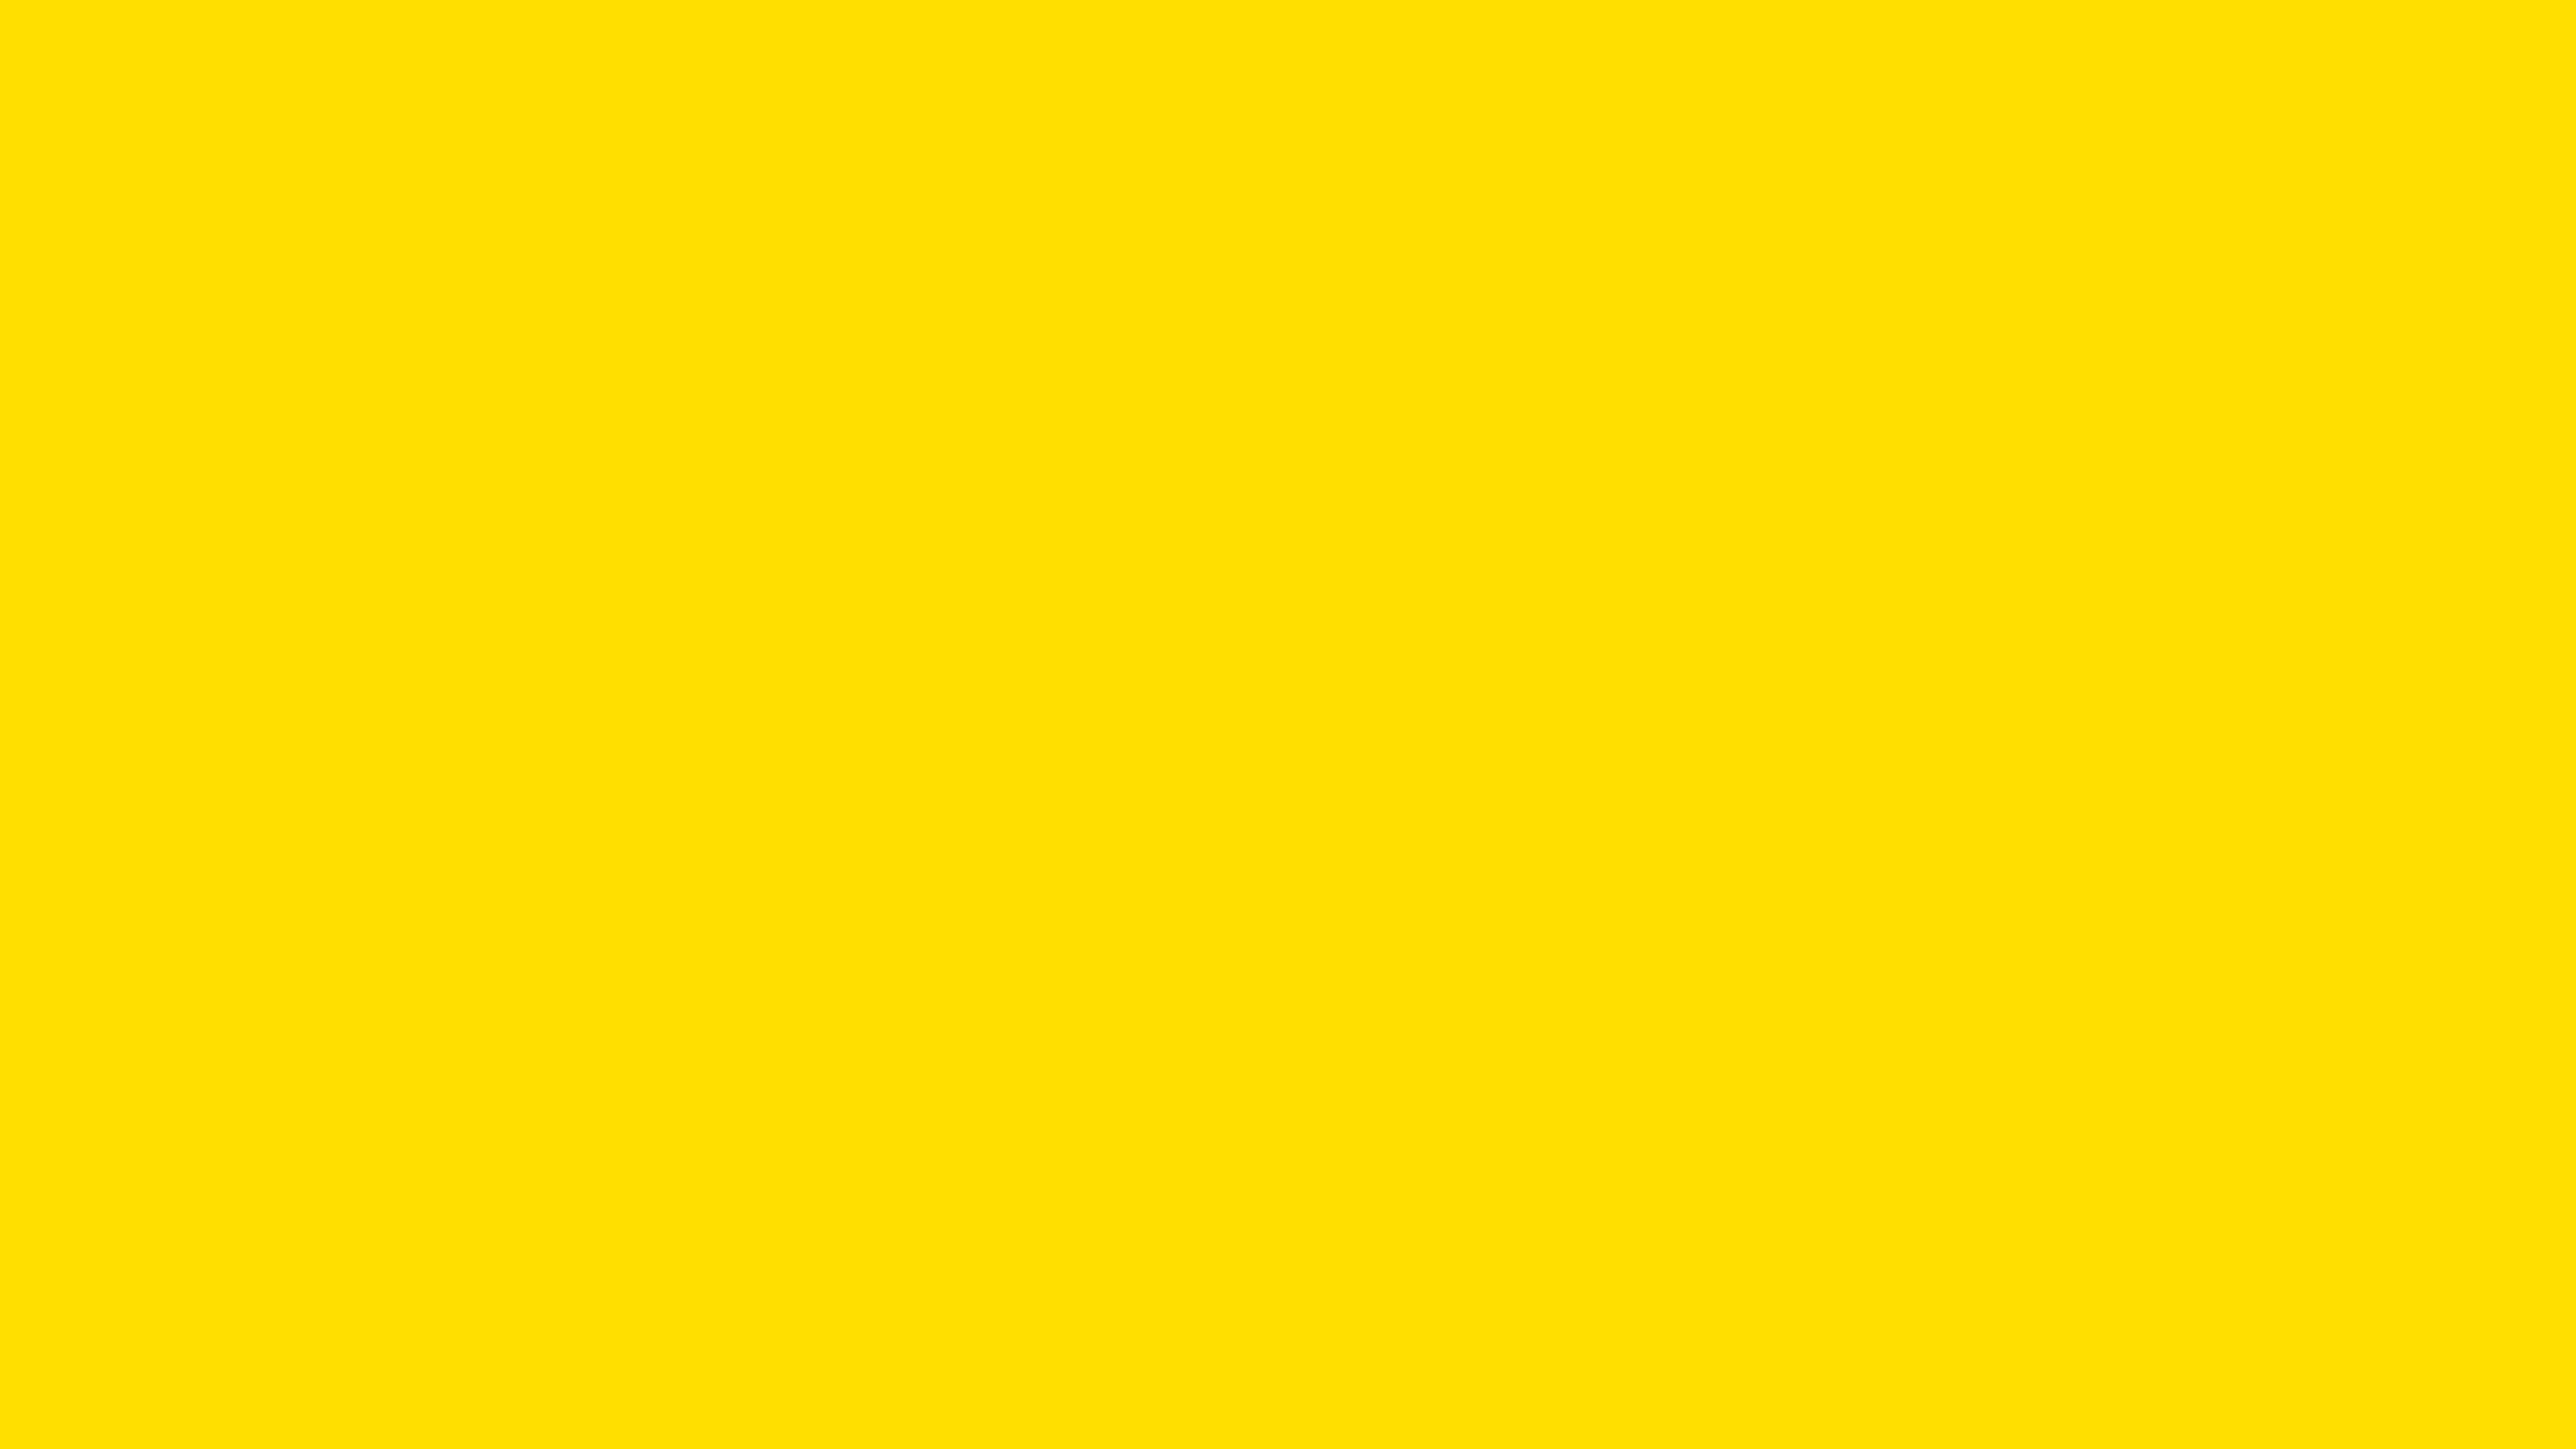 4096x2304 Golden Yellow Solid Color Background